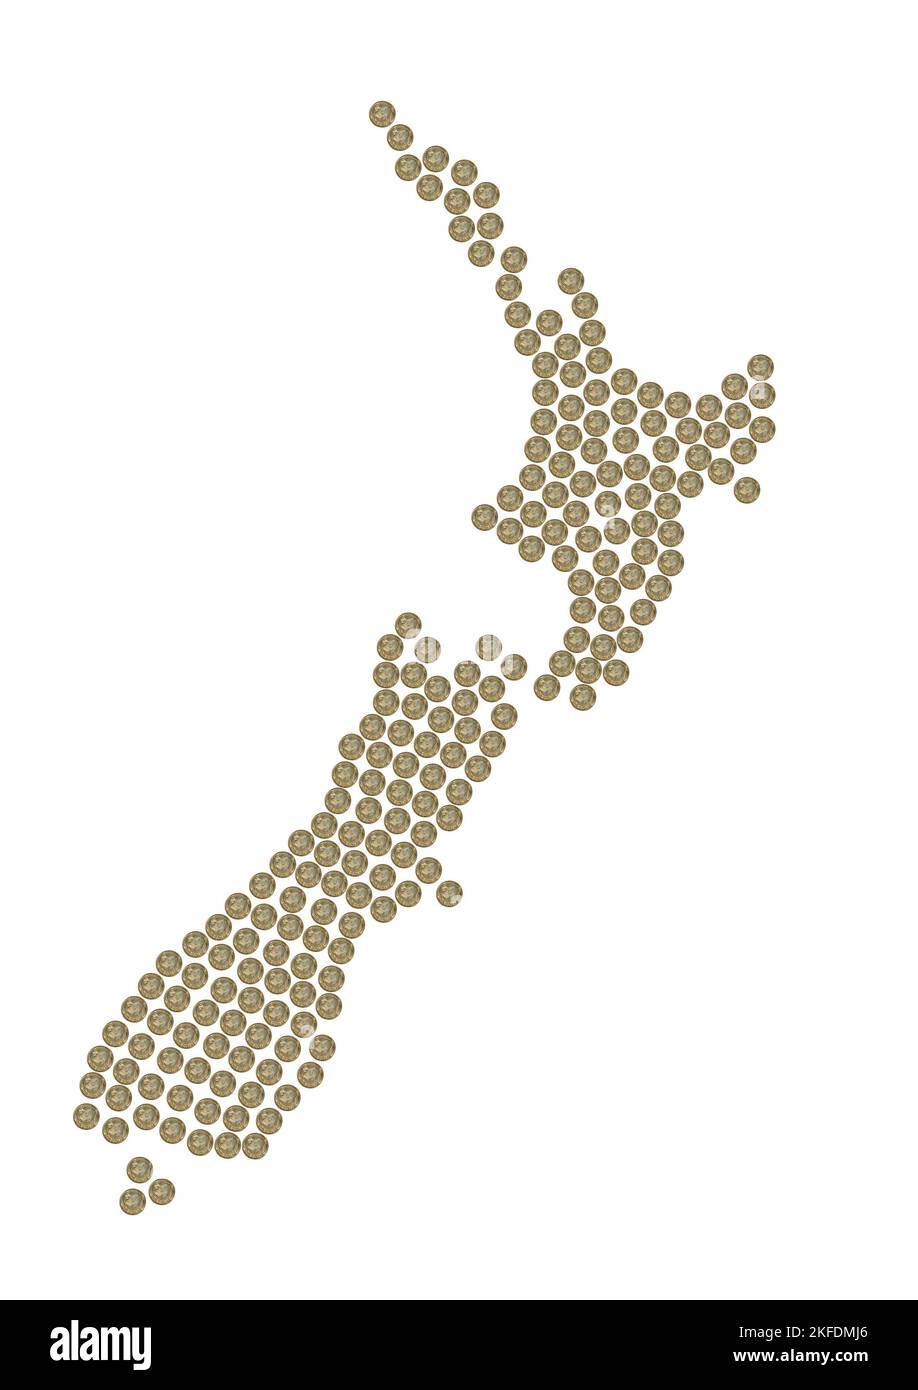 A map of Zealand made from New Zealand one dollar coins. Stock Photo